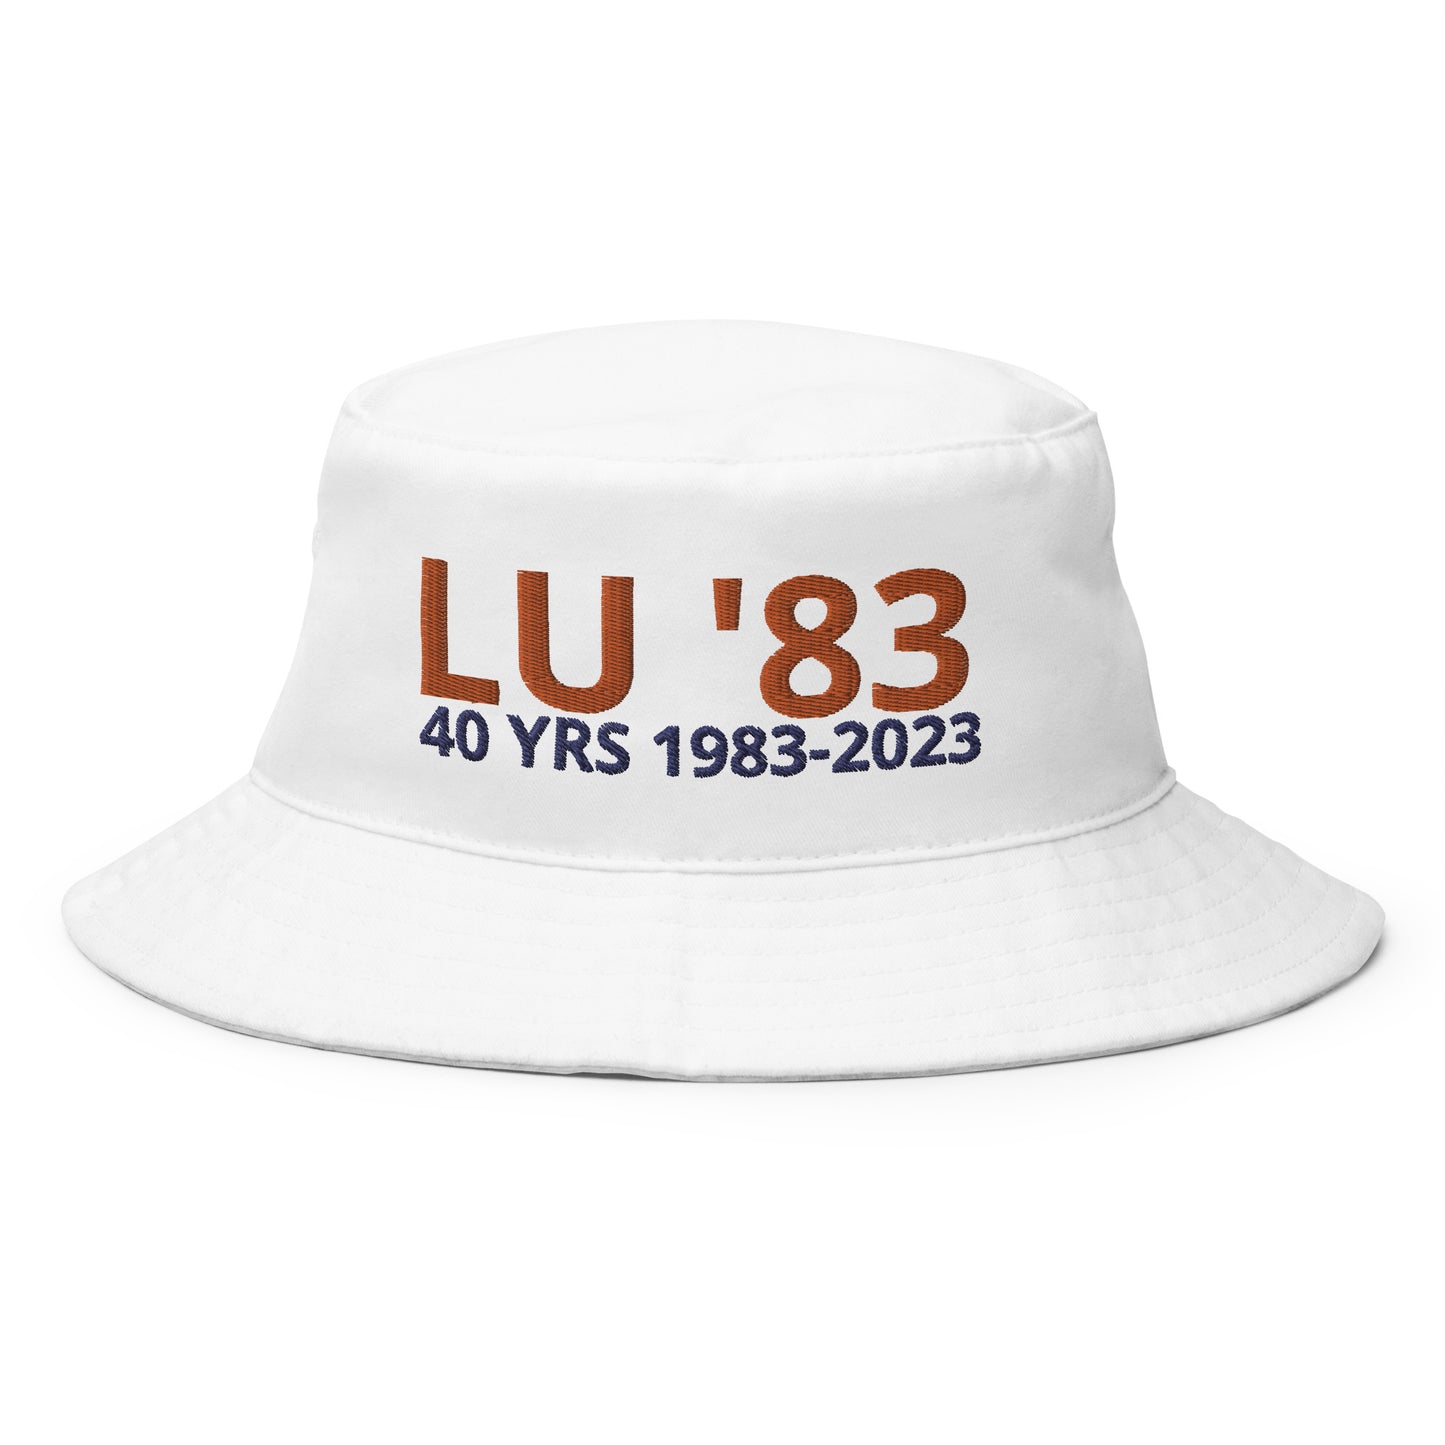 LU '83 Bucket Hat - White - Orange and Blue Embroidered text